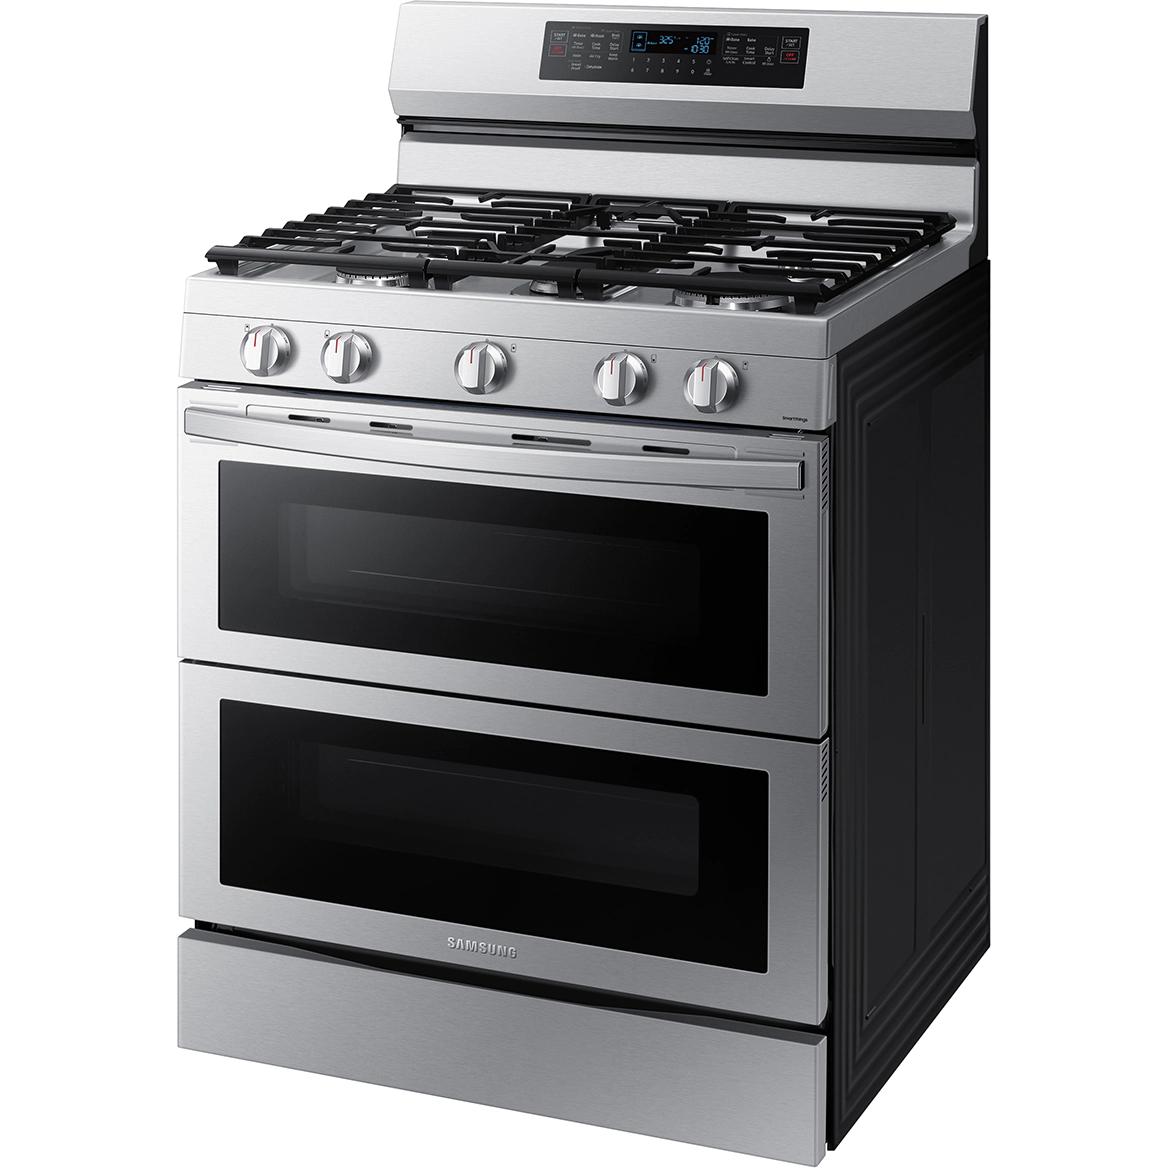 Samsung 30-inch Freestanding Gas Range with Wi-Fi Connectivity NX60A6751SS/AA